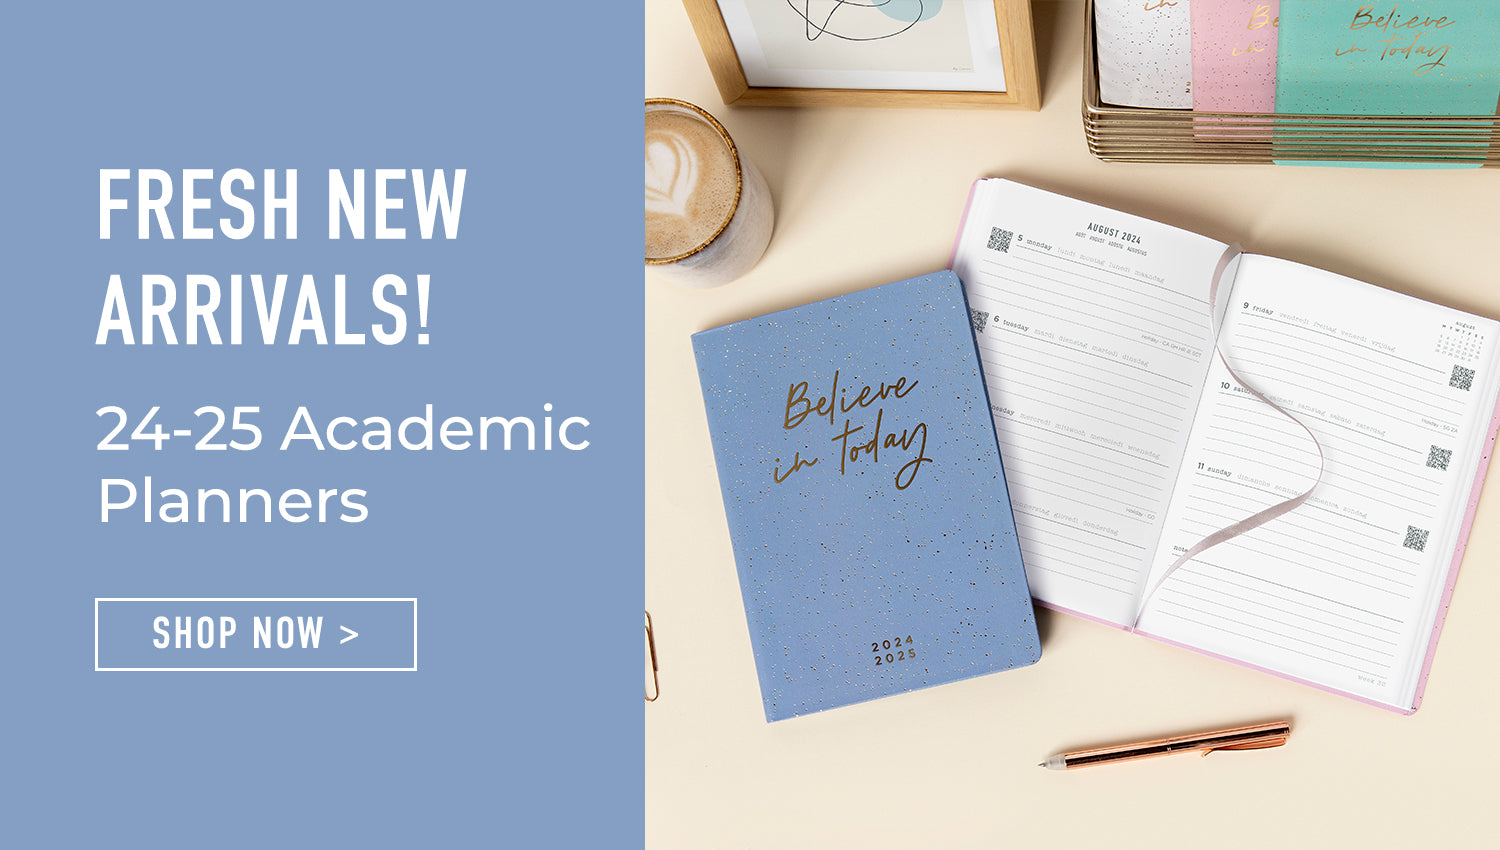 Fresh New Arrivals! 24-25 Academic Planners